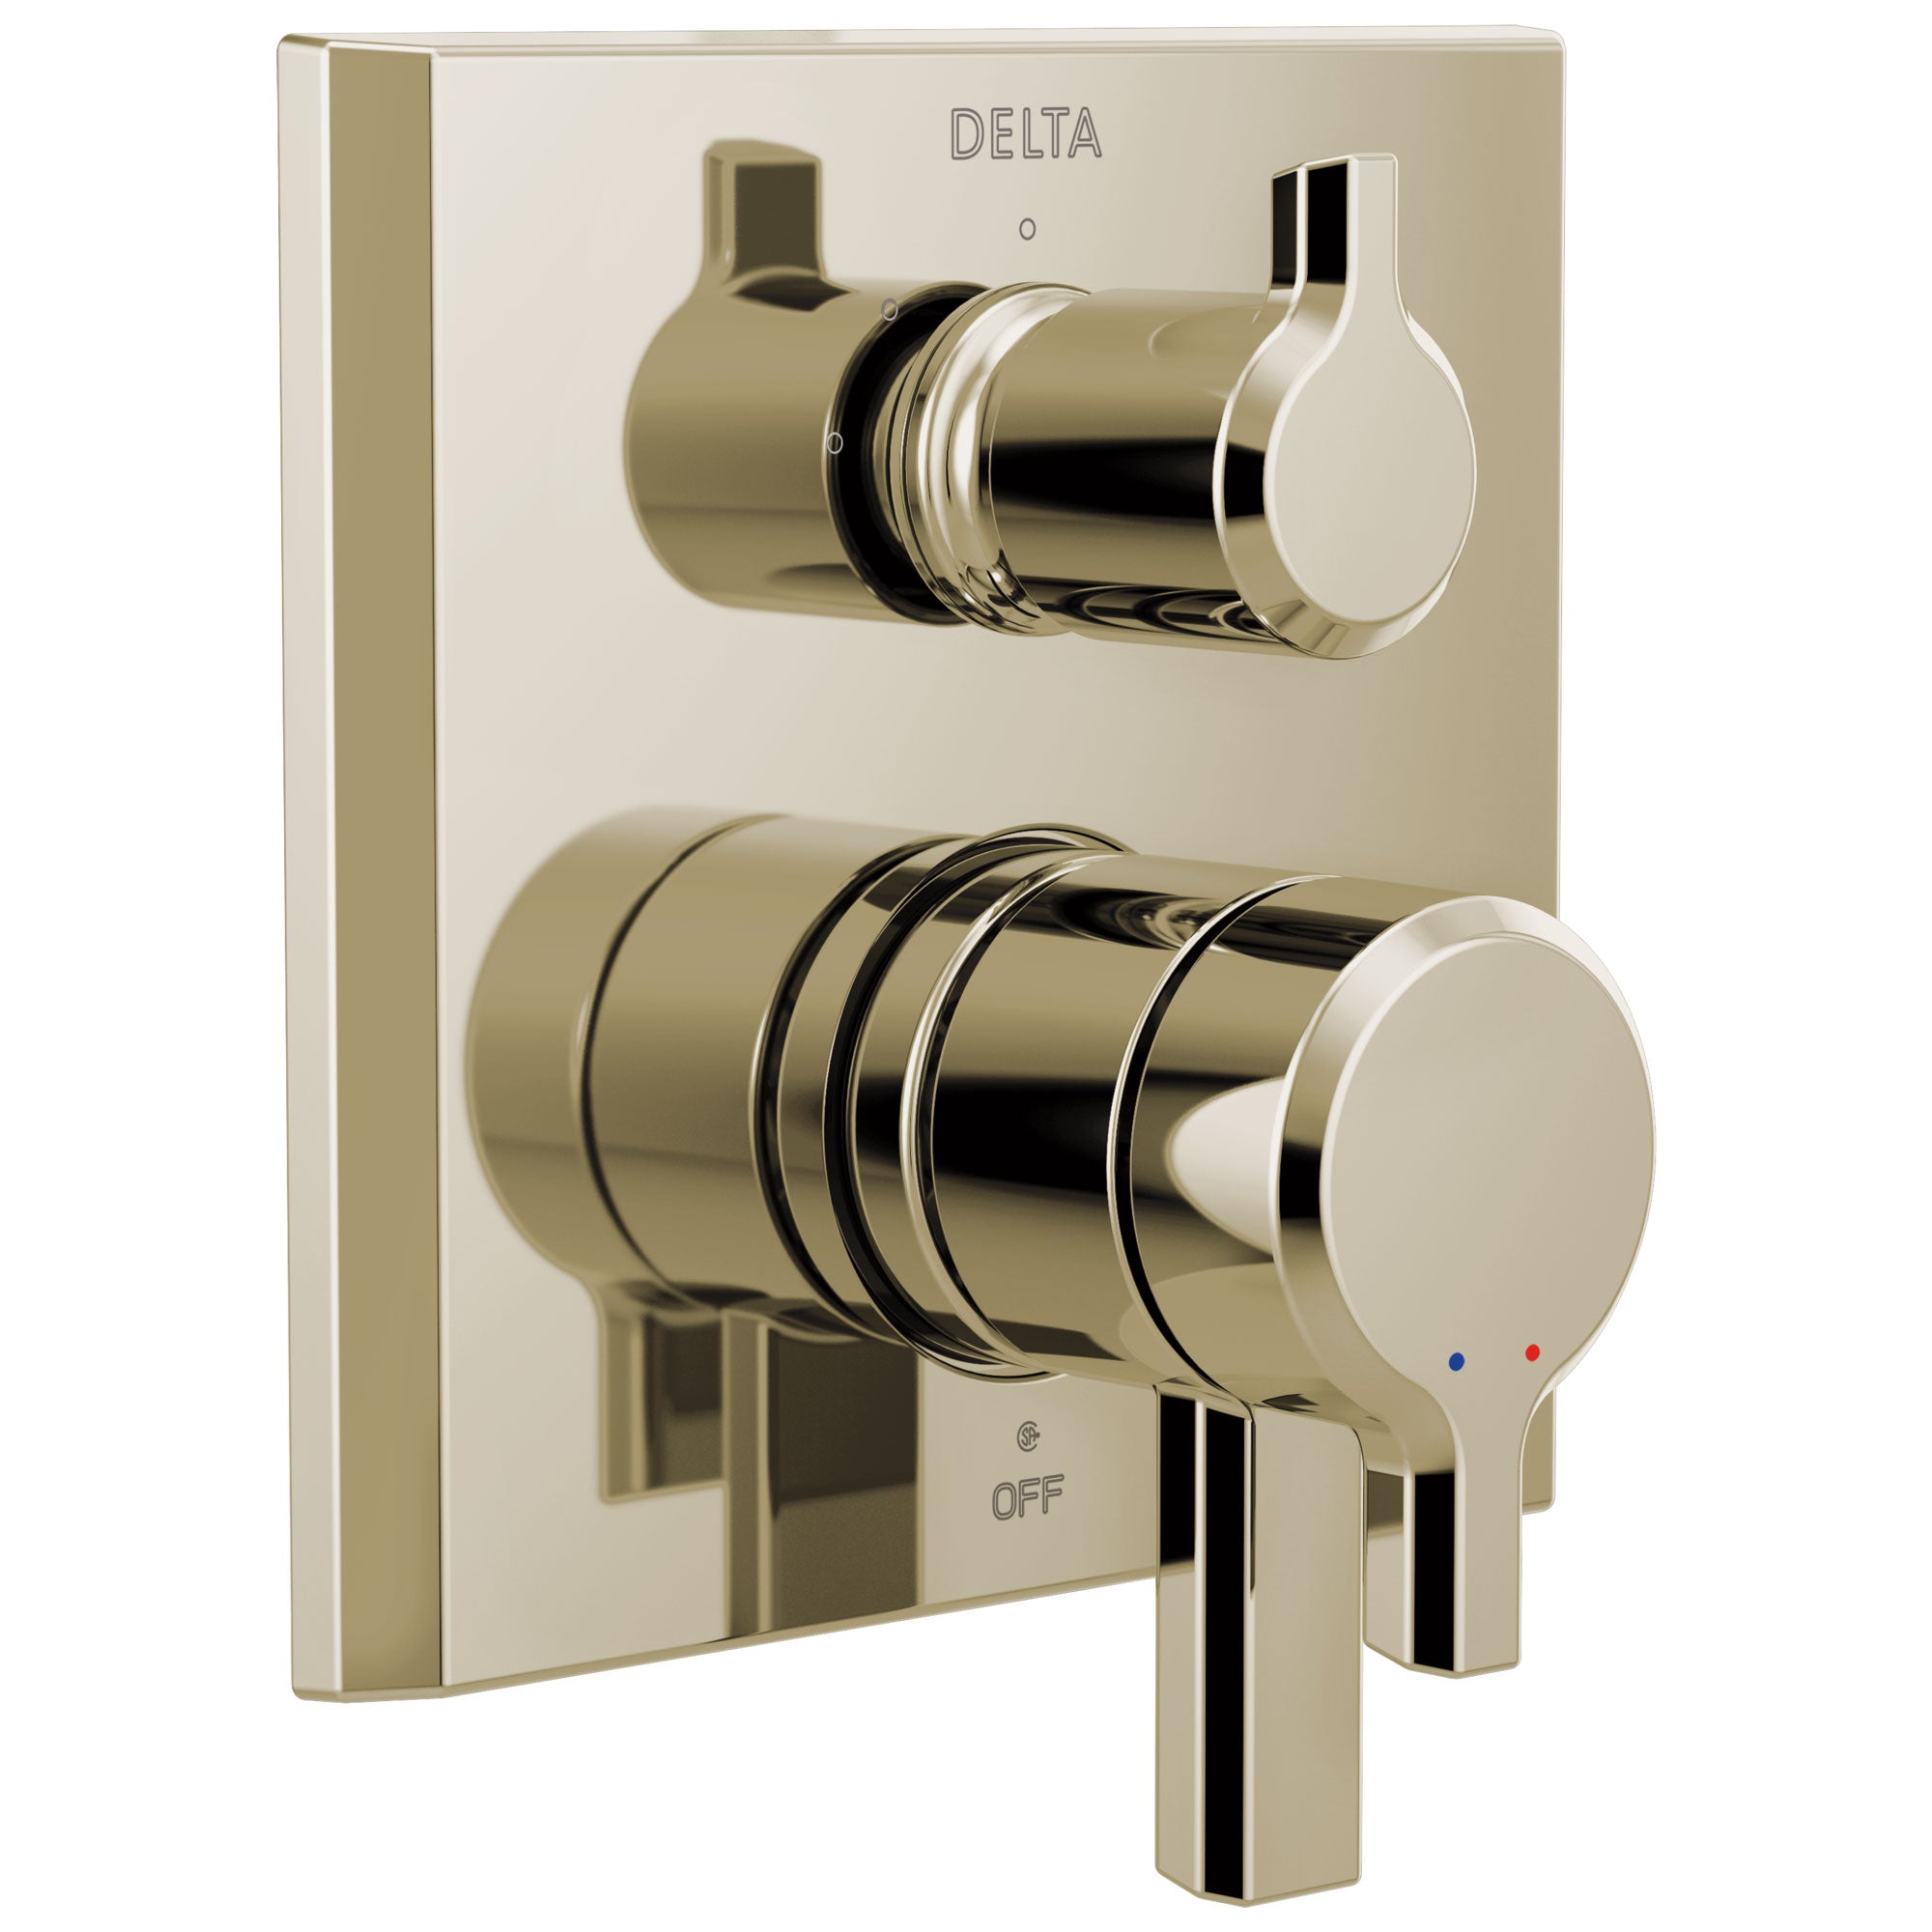 Delta Pivotal Polished Nickel Finish Monitor 17 Series Shower System Control with 3-Setting Diverter Includes Rough-in Valve and Handles D3135V